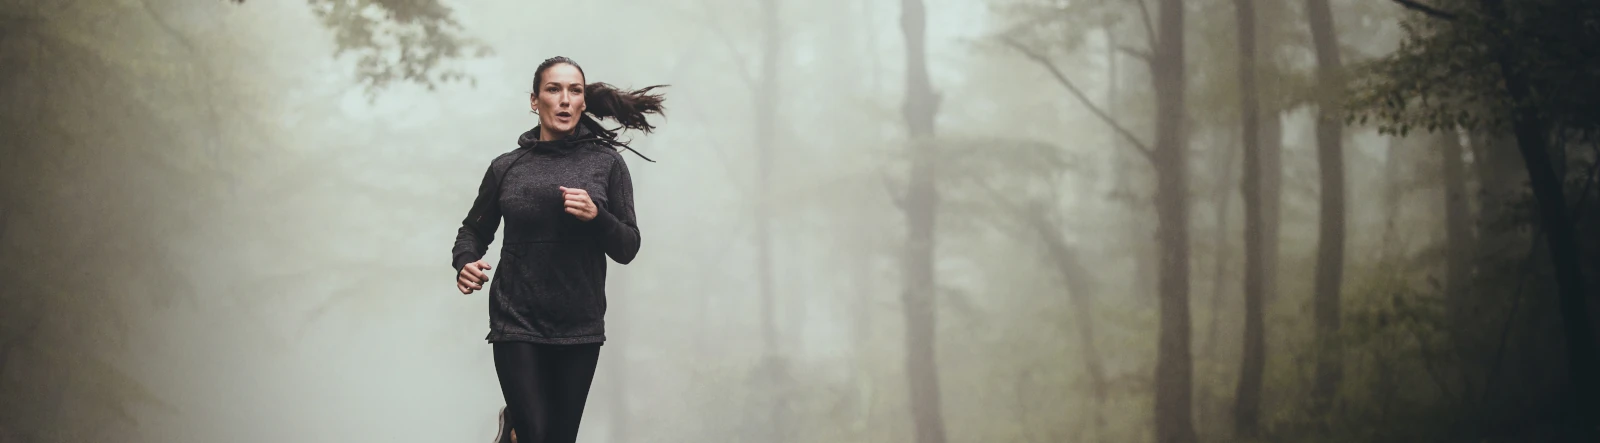 A woman running through a forest in the morning mist